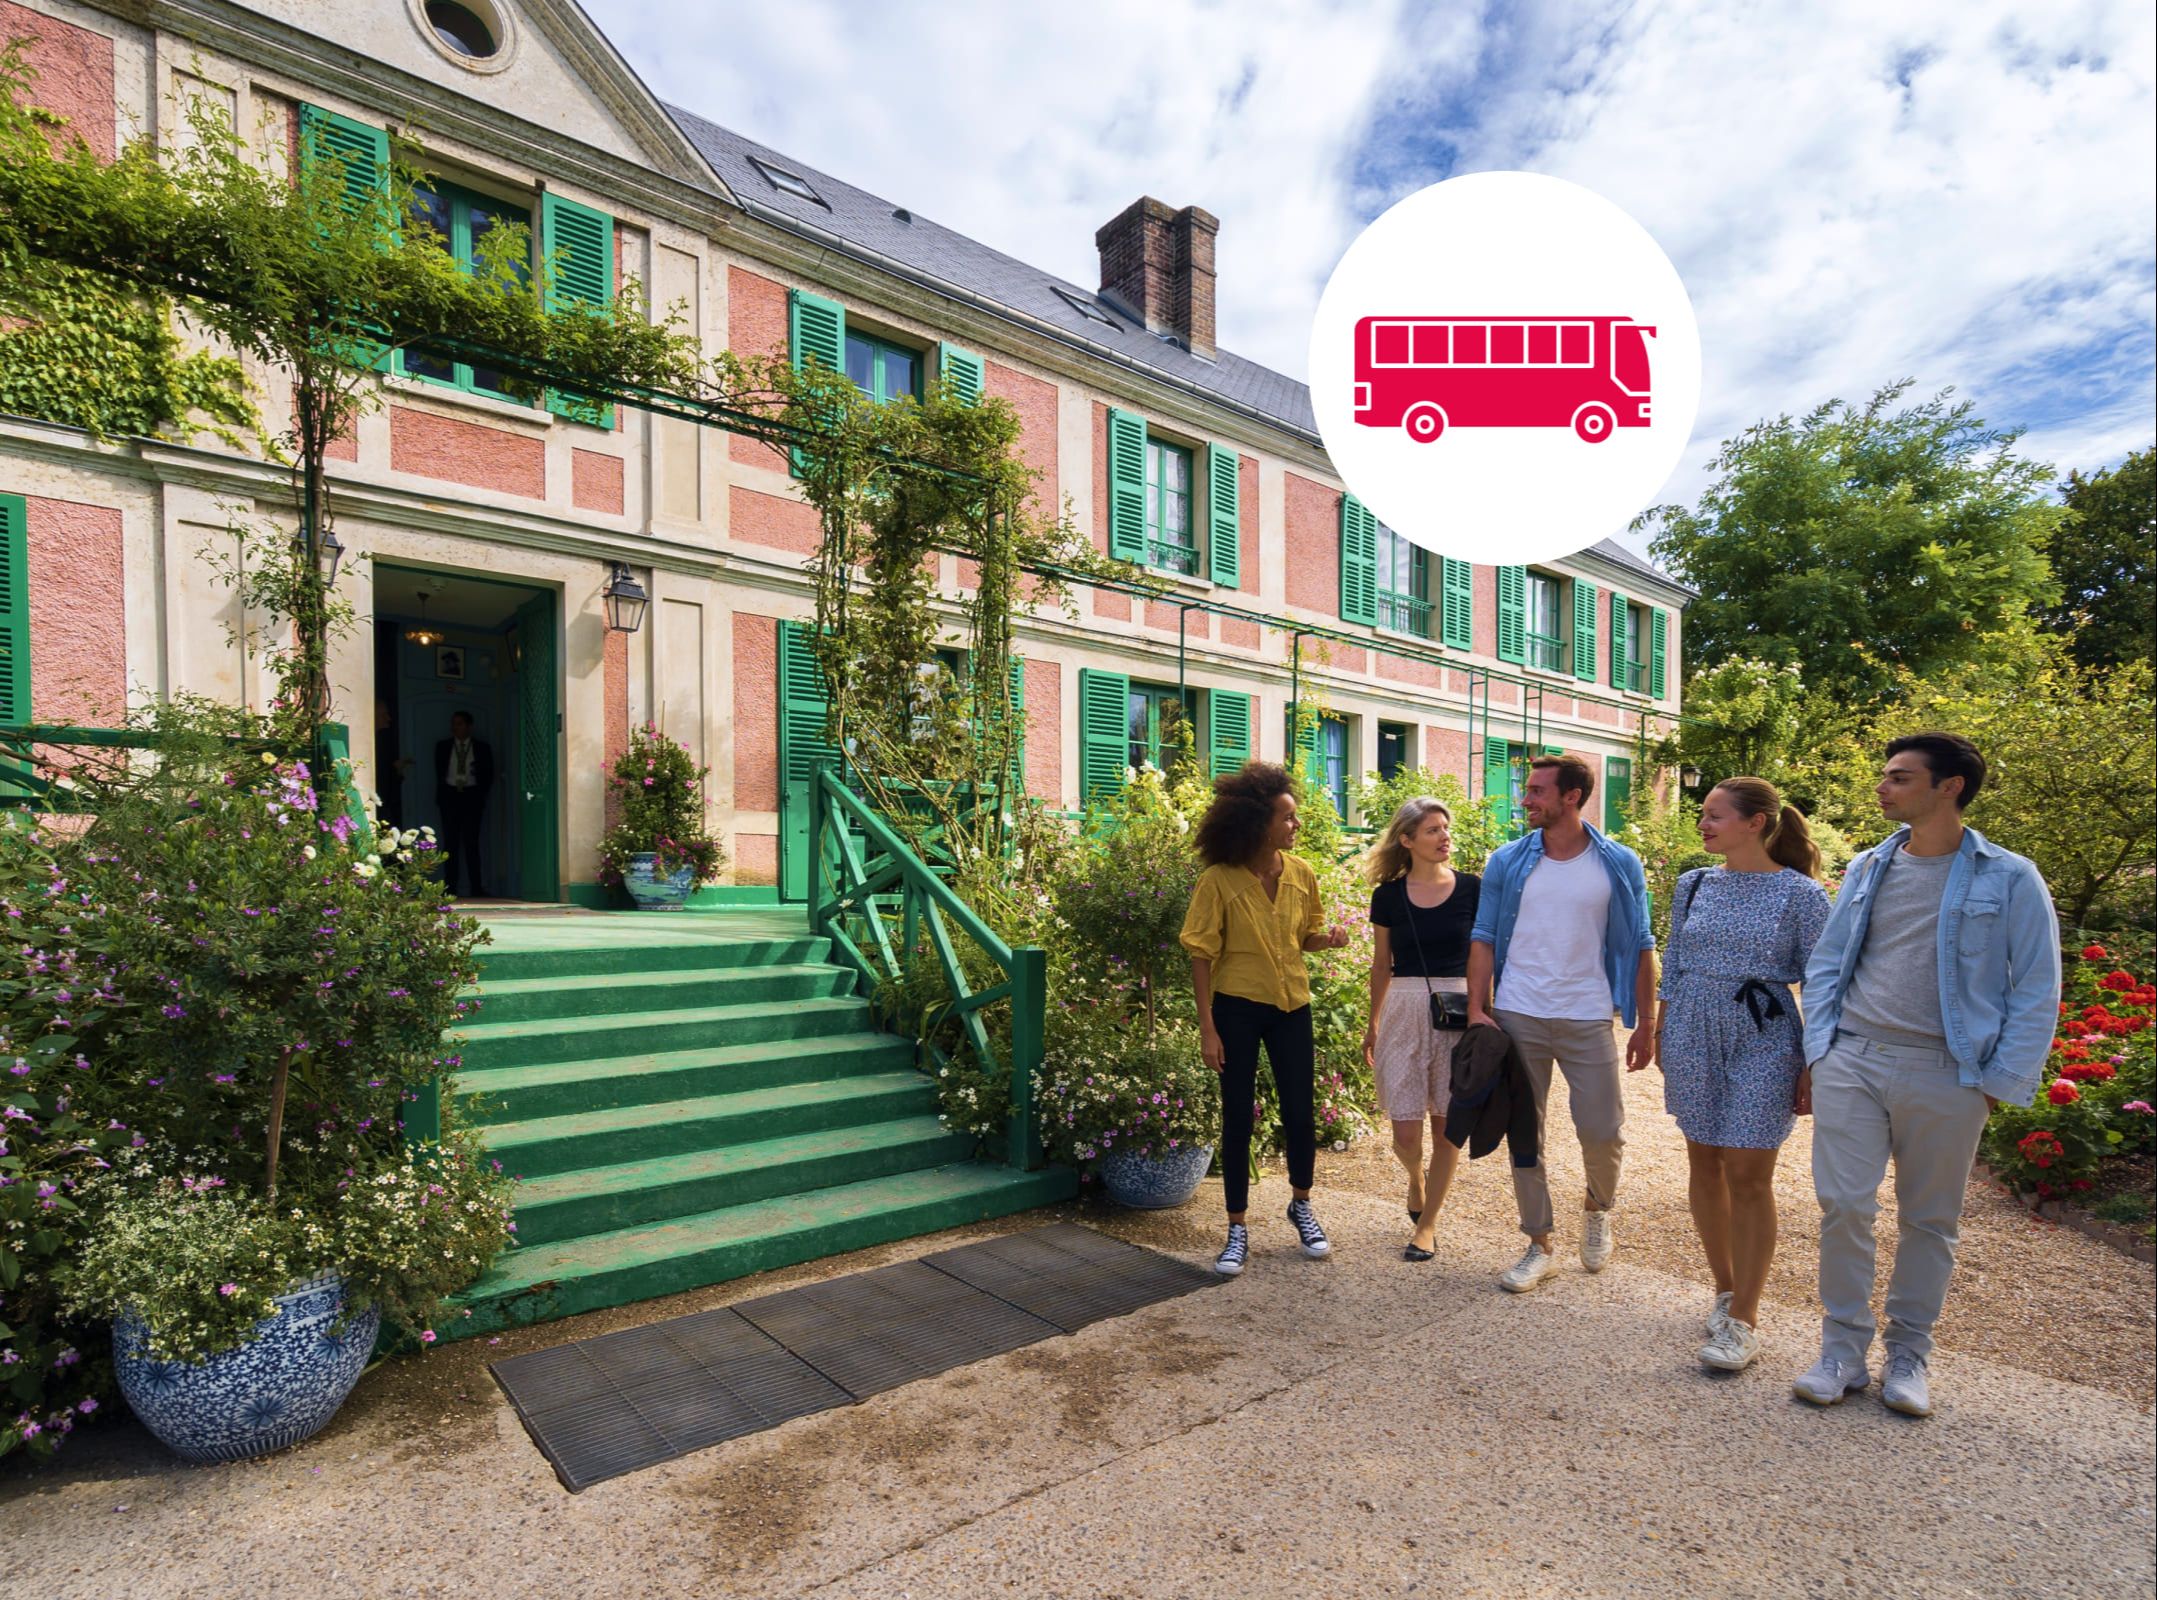 Half Day Trip Guided Tour of Giverny Monet's Gardens from Paris with transportation